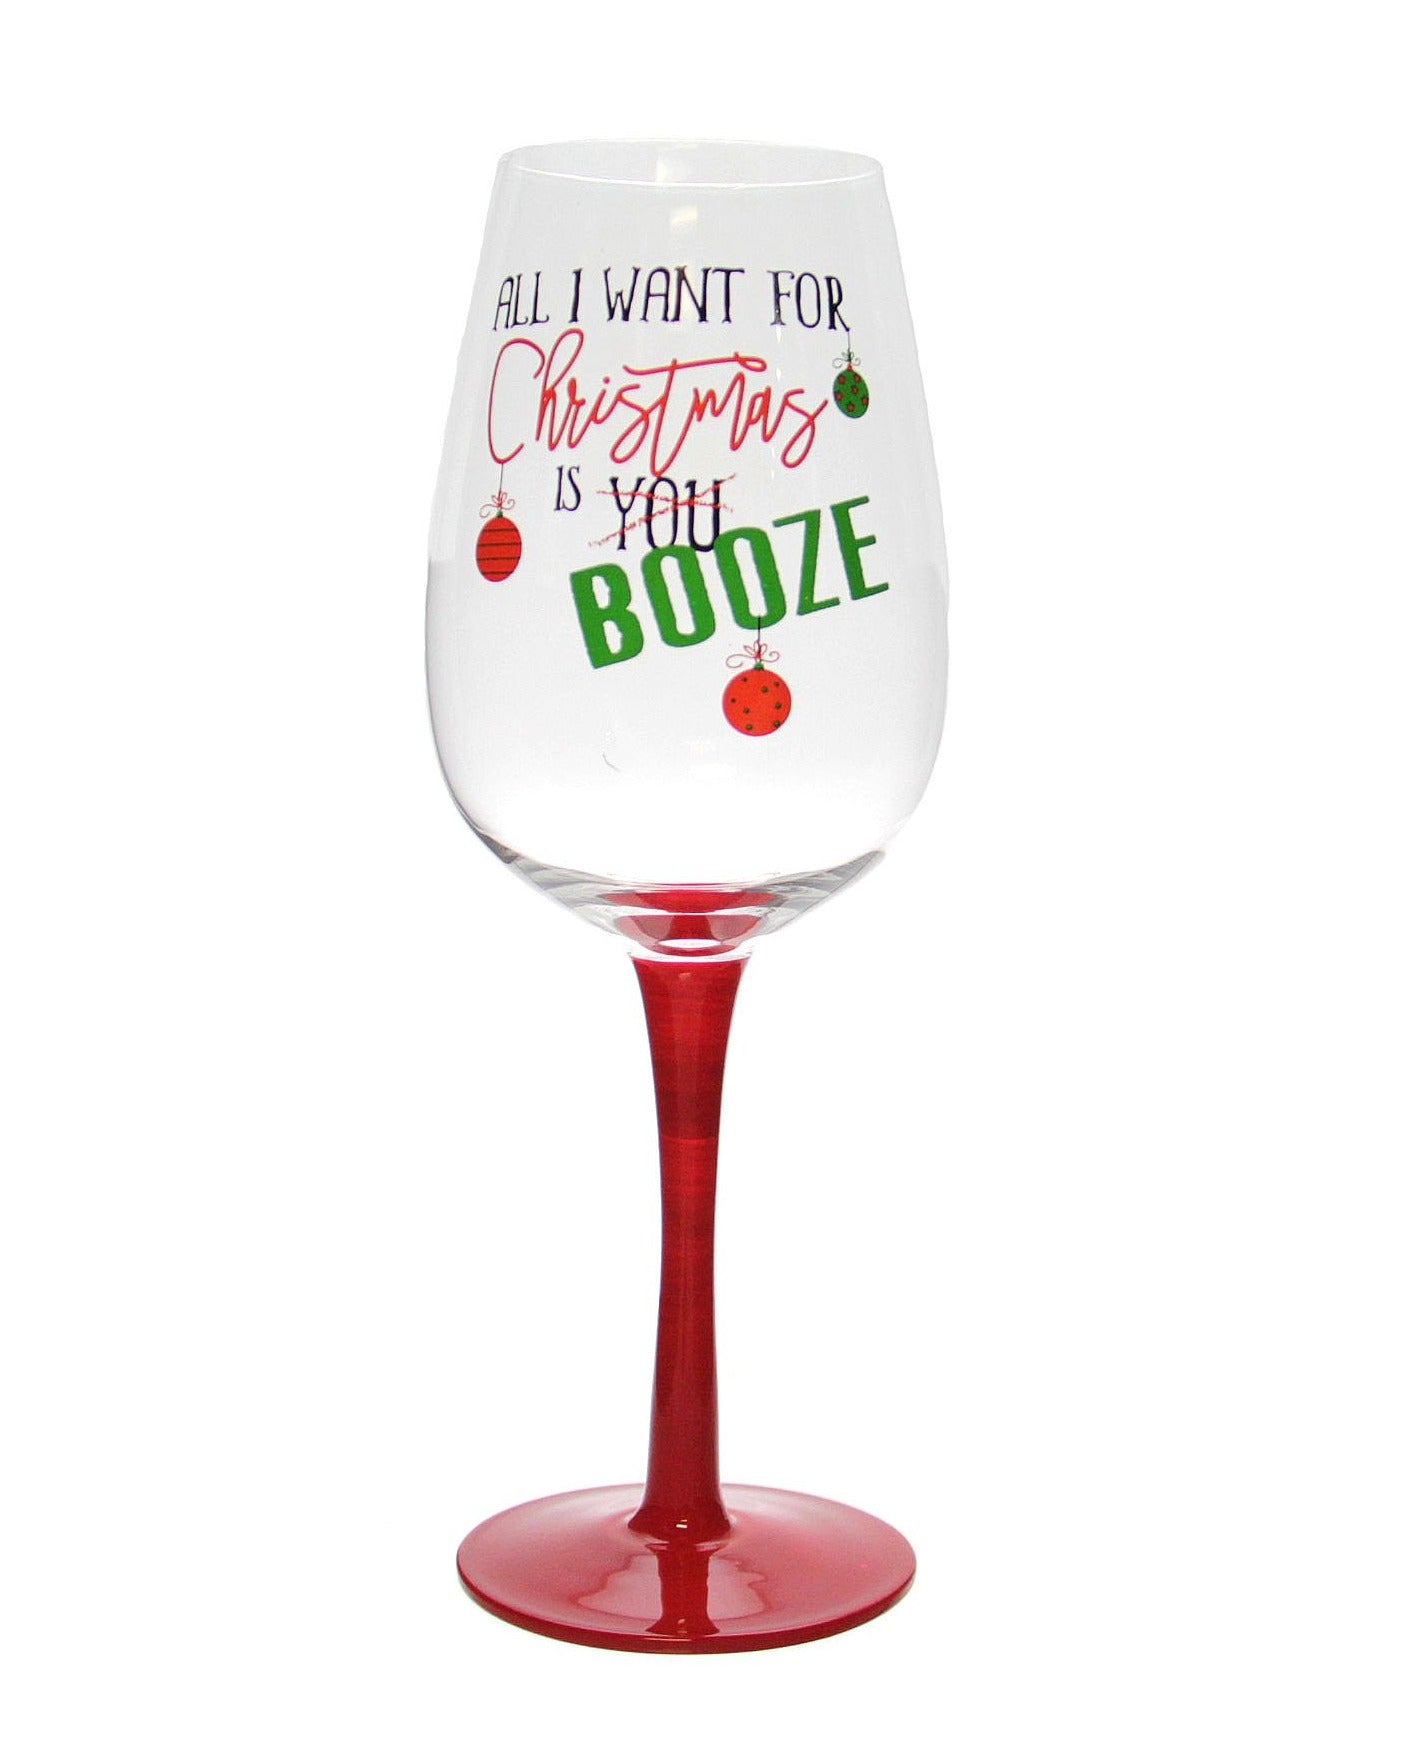 "All I Want For Christmas is Booze" Humorous Wine Glass